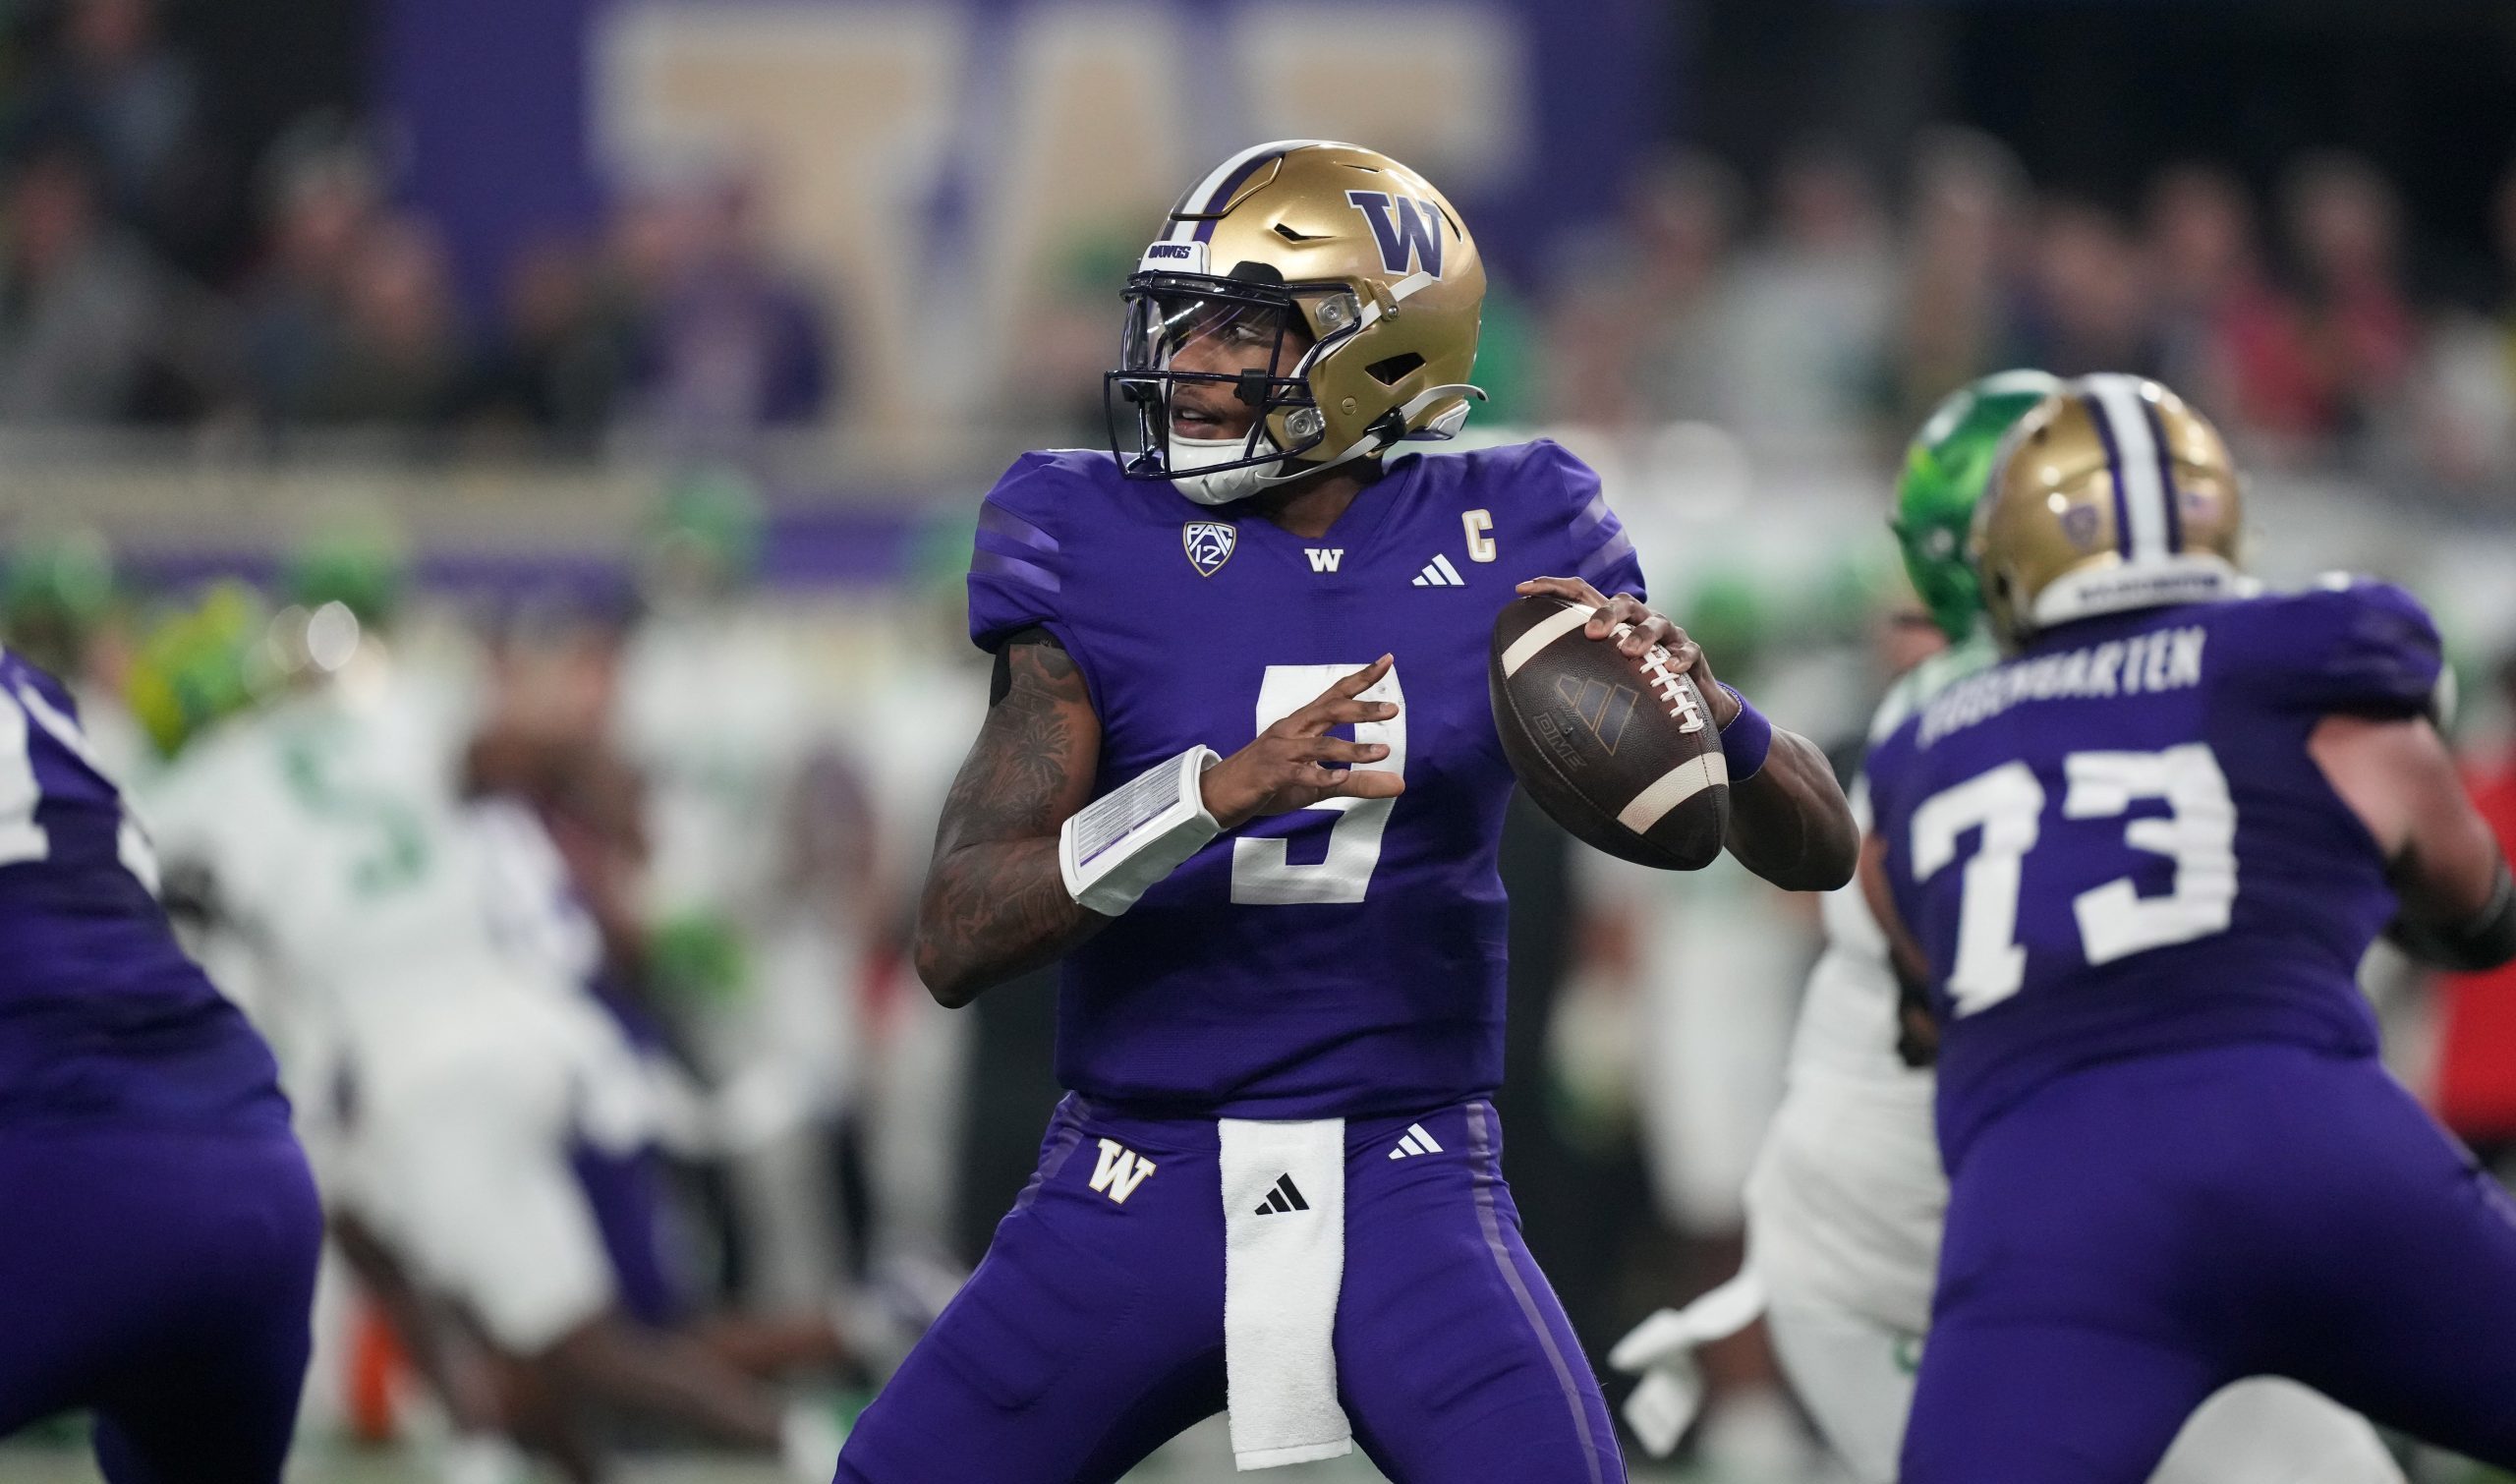 Washington quarterback Michael Penix Jr. earned strong praise for his performance in the Pac-12 Championship Game. Kirby Lee-USA TODAY Sports